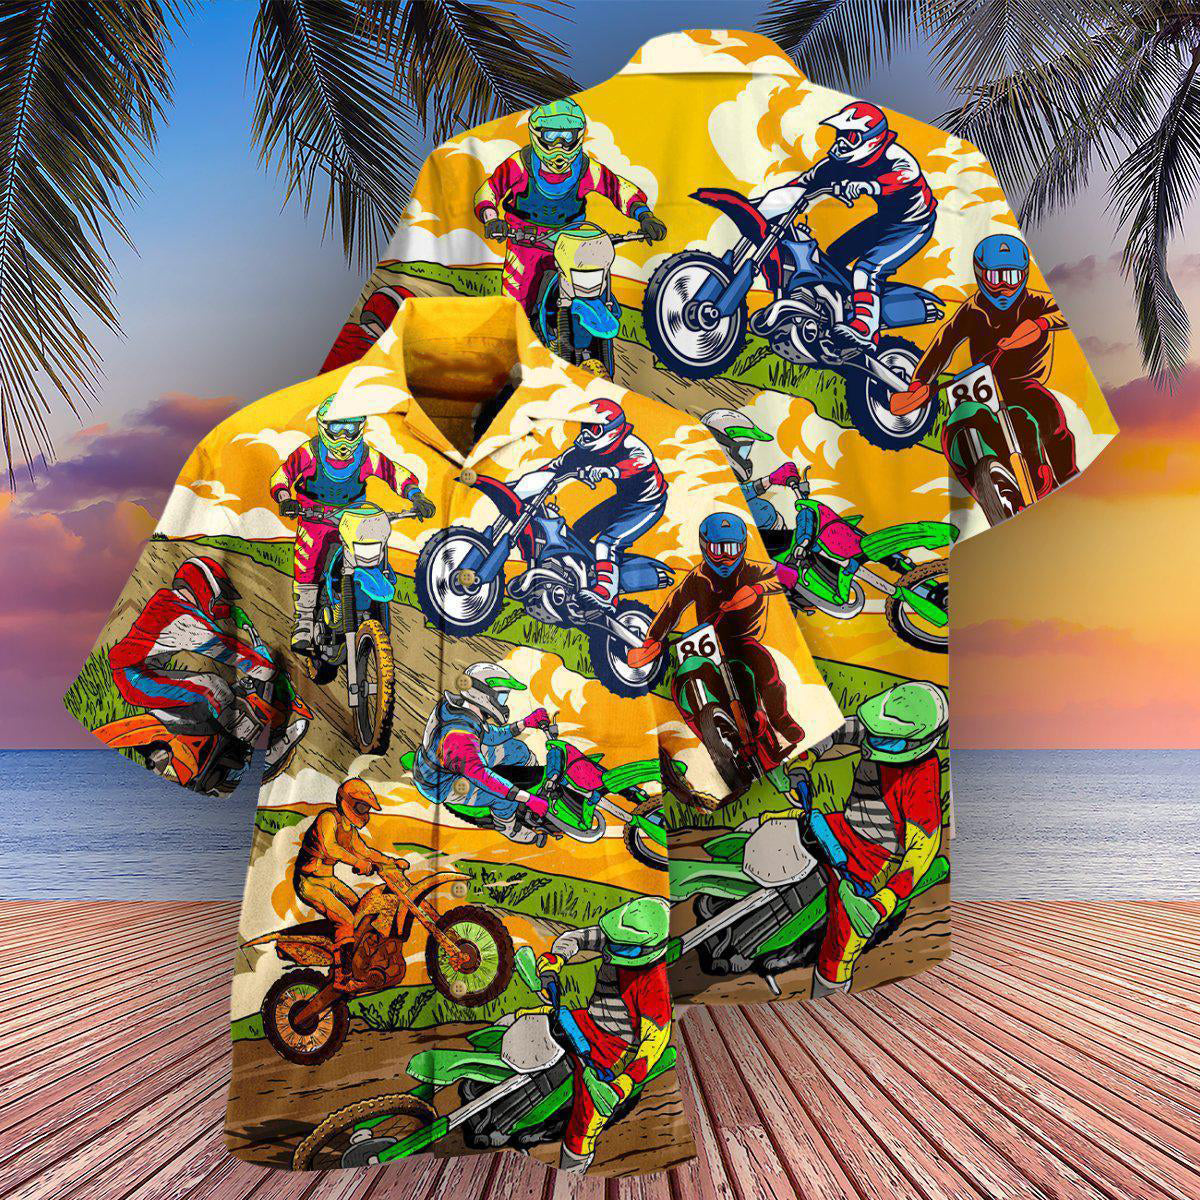 Motorcycle What Is Life Without A Little Risk I'm Cool - Hawaiian Shirt - Owls Matrix LTD